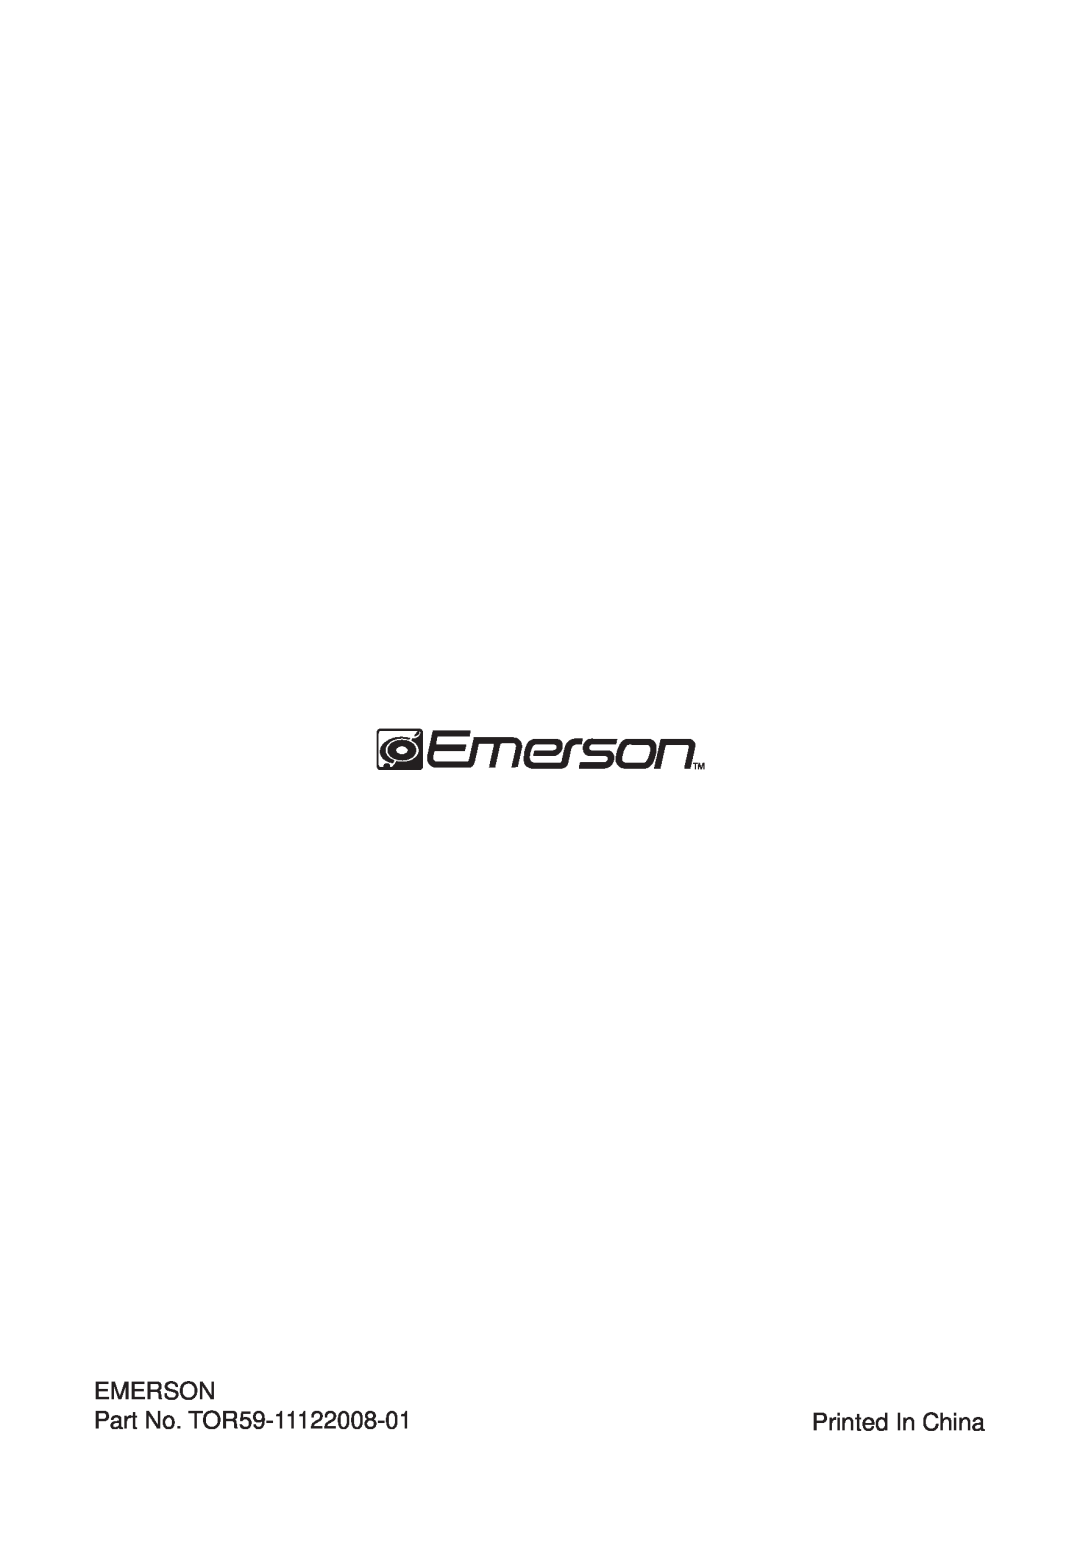 Emerson owner manual Emerson, Part No. TOR59-11122008-01 